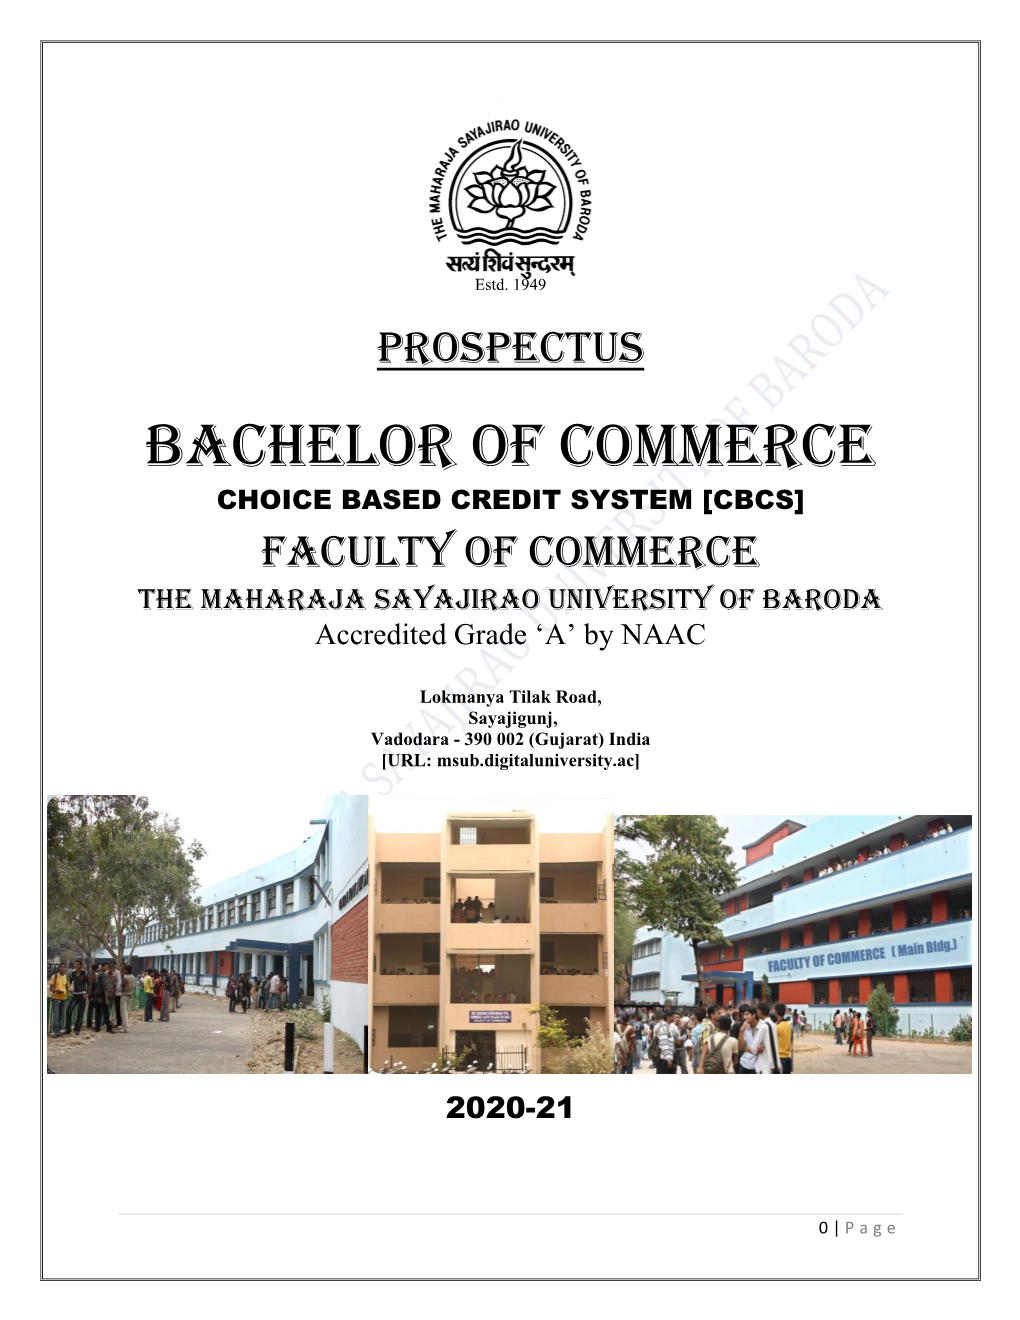 BACHELOR of COMMERCE CHOICE BASED CREDIT SYSTEM [CBCS] FACULTY of COMMERCE the MAHARAJA SAYAJIRAO UNIVERSITY of BARODA Accredited Grade ‘A’ by NAAC